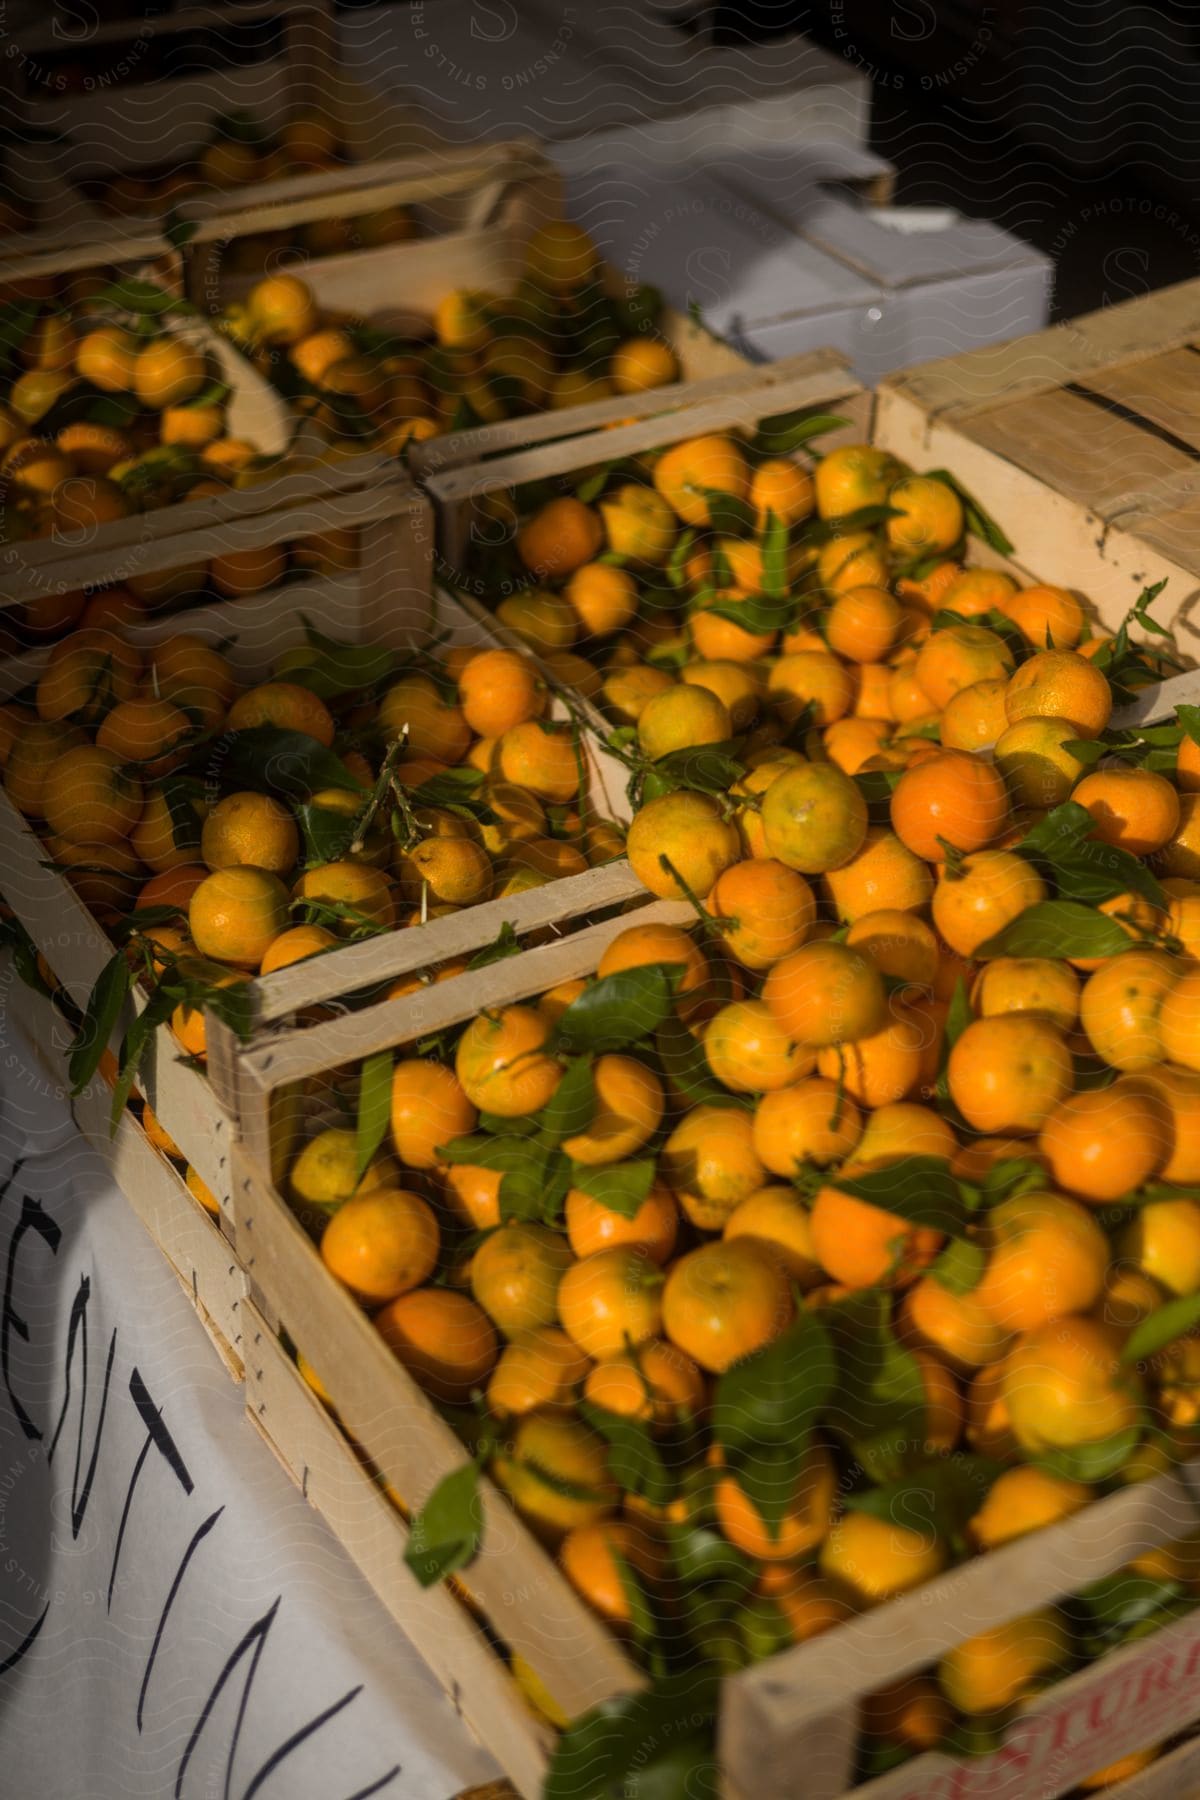 Boxes filled with clementines are on a table at a fruit stand